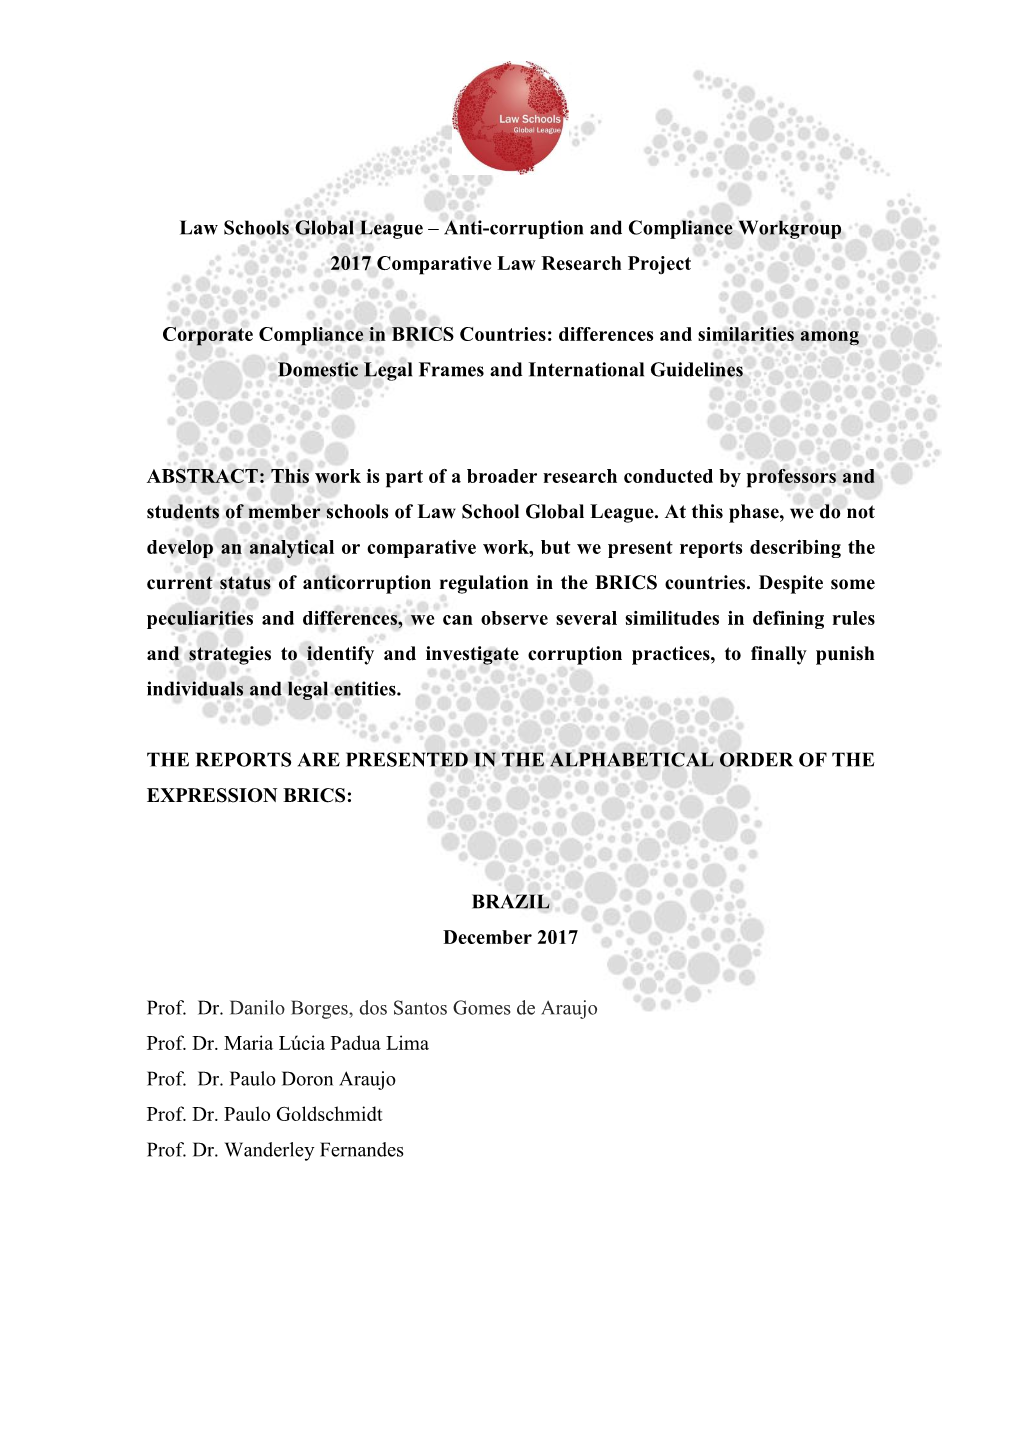 Law Schools Global League – Anti-Corruption and Compliance Workgroup 2017 Comparative Law Research Project